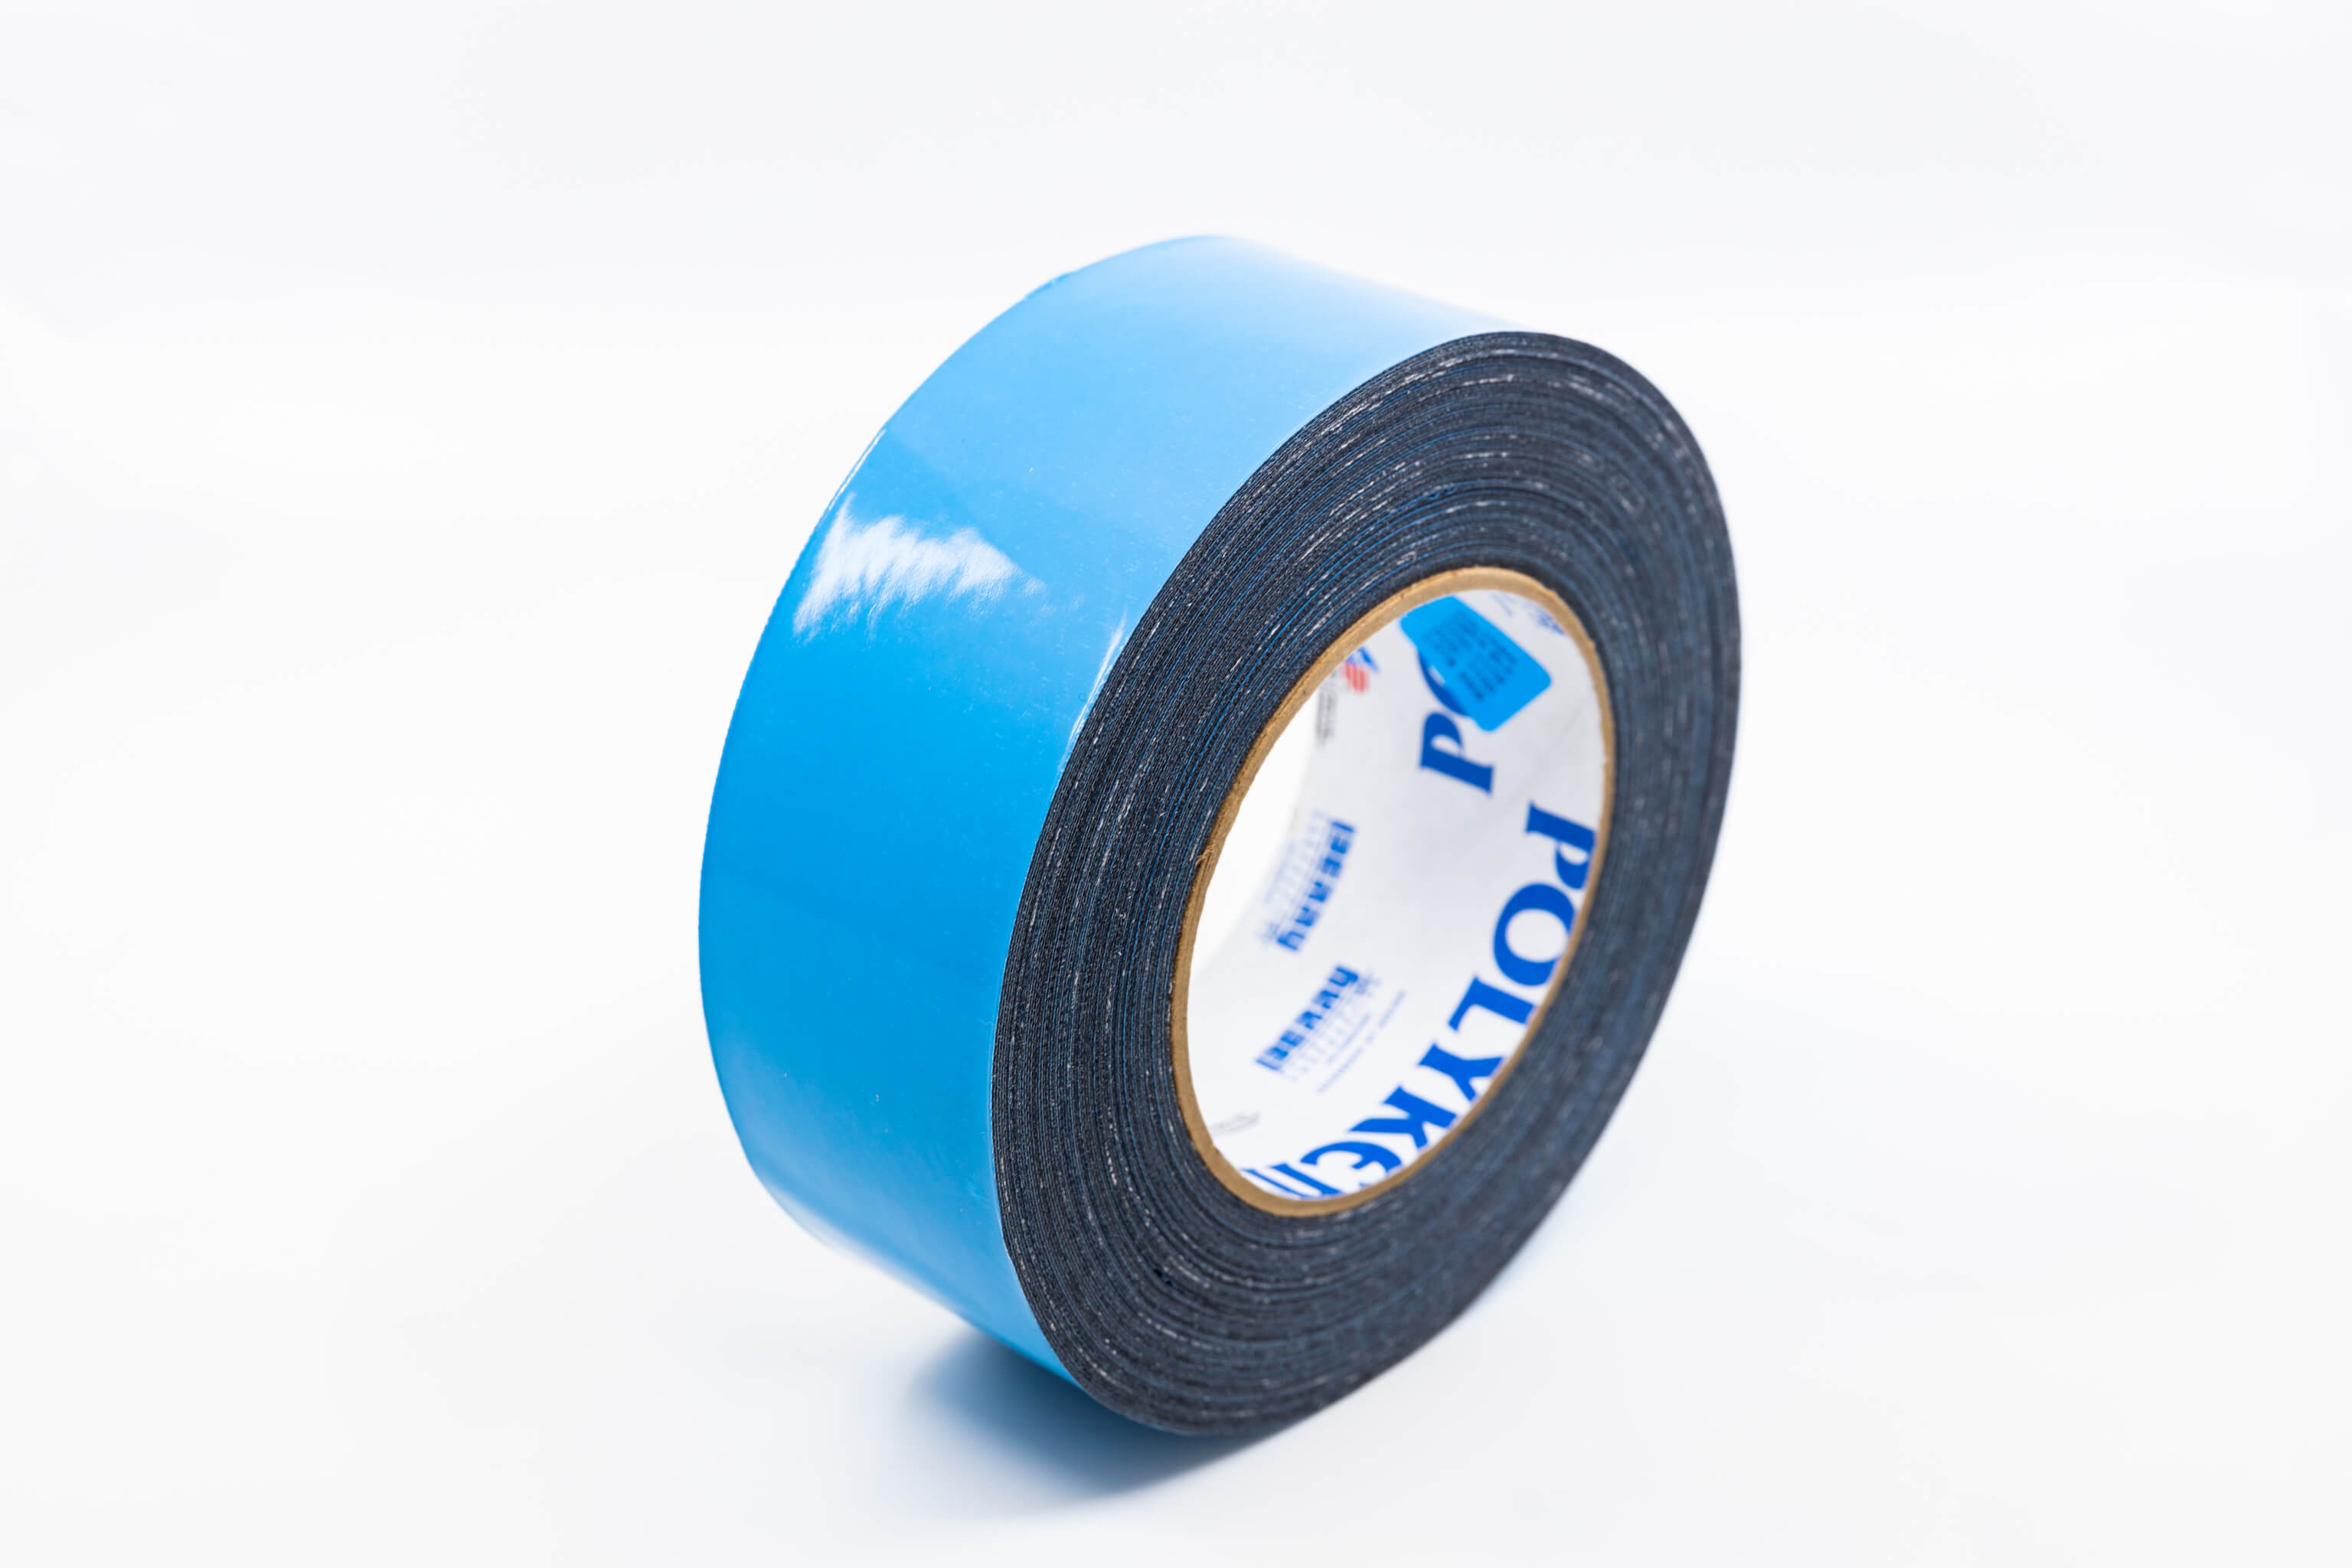 Polyken 108FR Flame Retardant Double Coated Cloth Carpet Tape: 2 in. x 75 ft. (Natural)